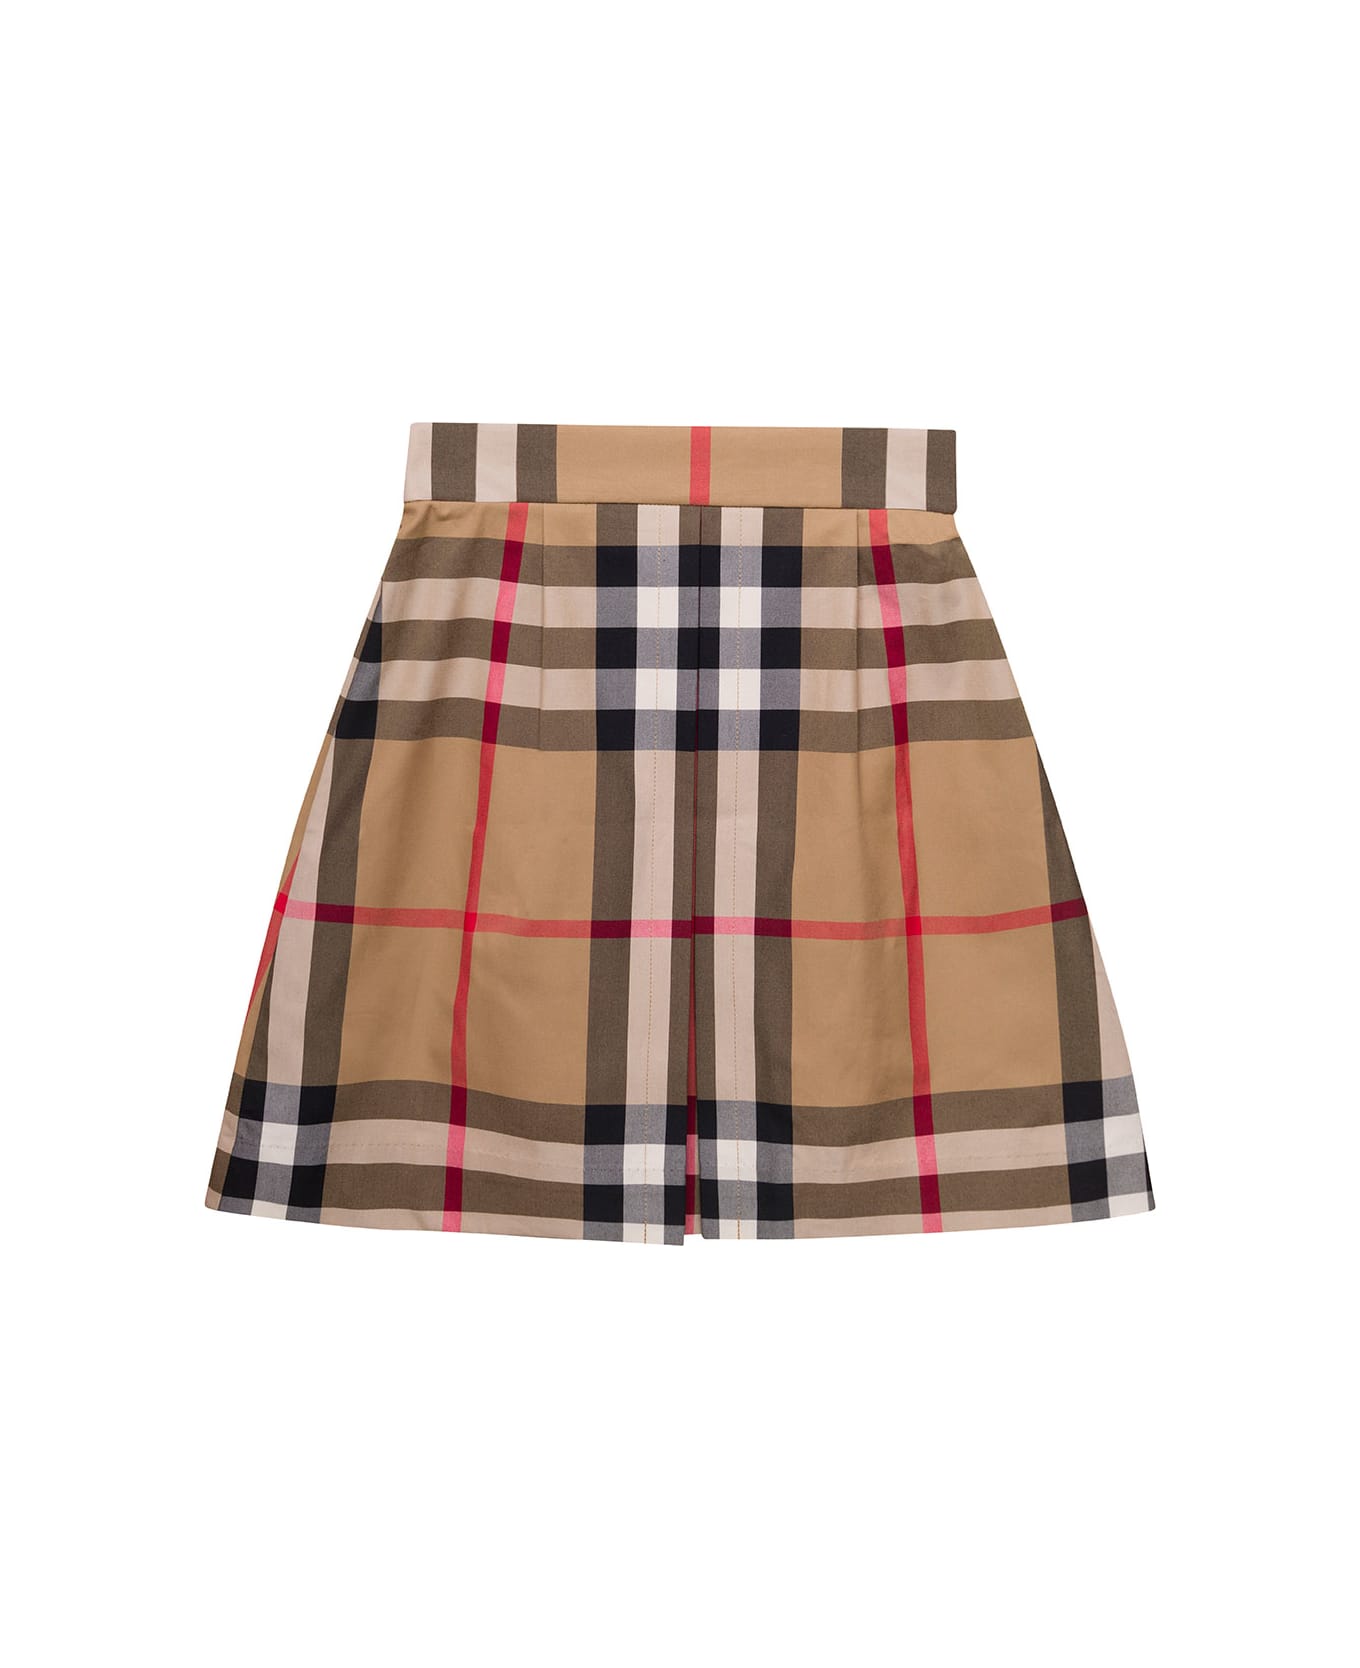 Burberry 'anjelica' Beige Mini Skirt With Vintage Check Motif In Cotton Girl - Archive beige ip chk